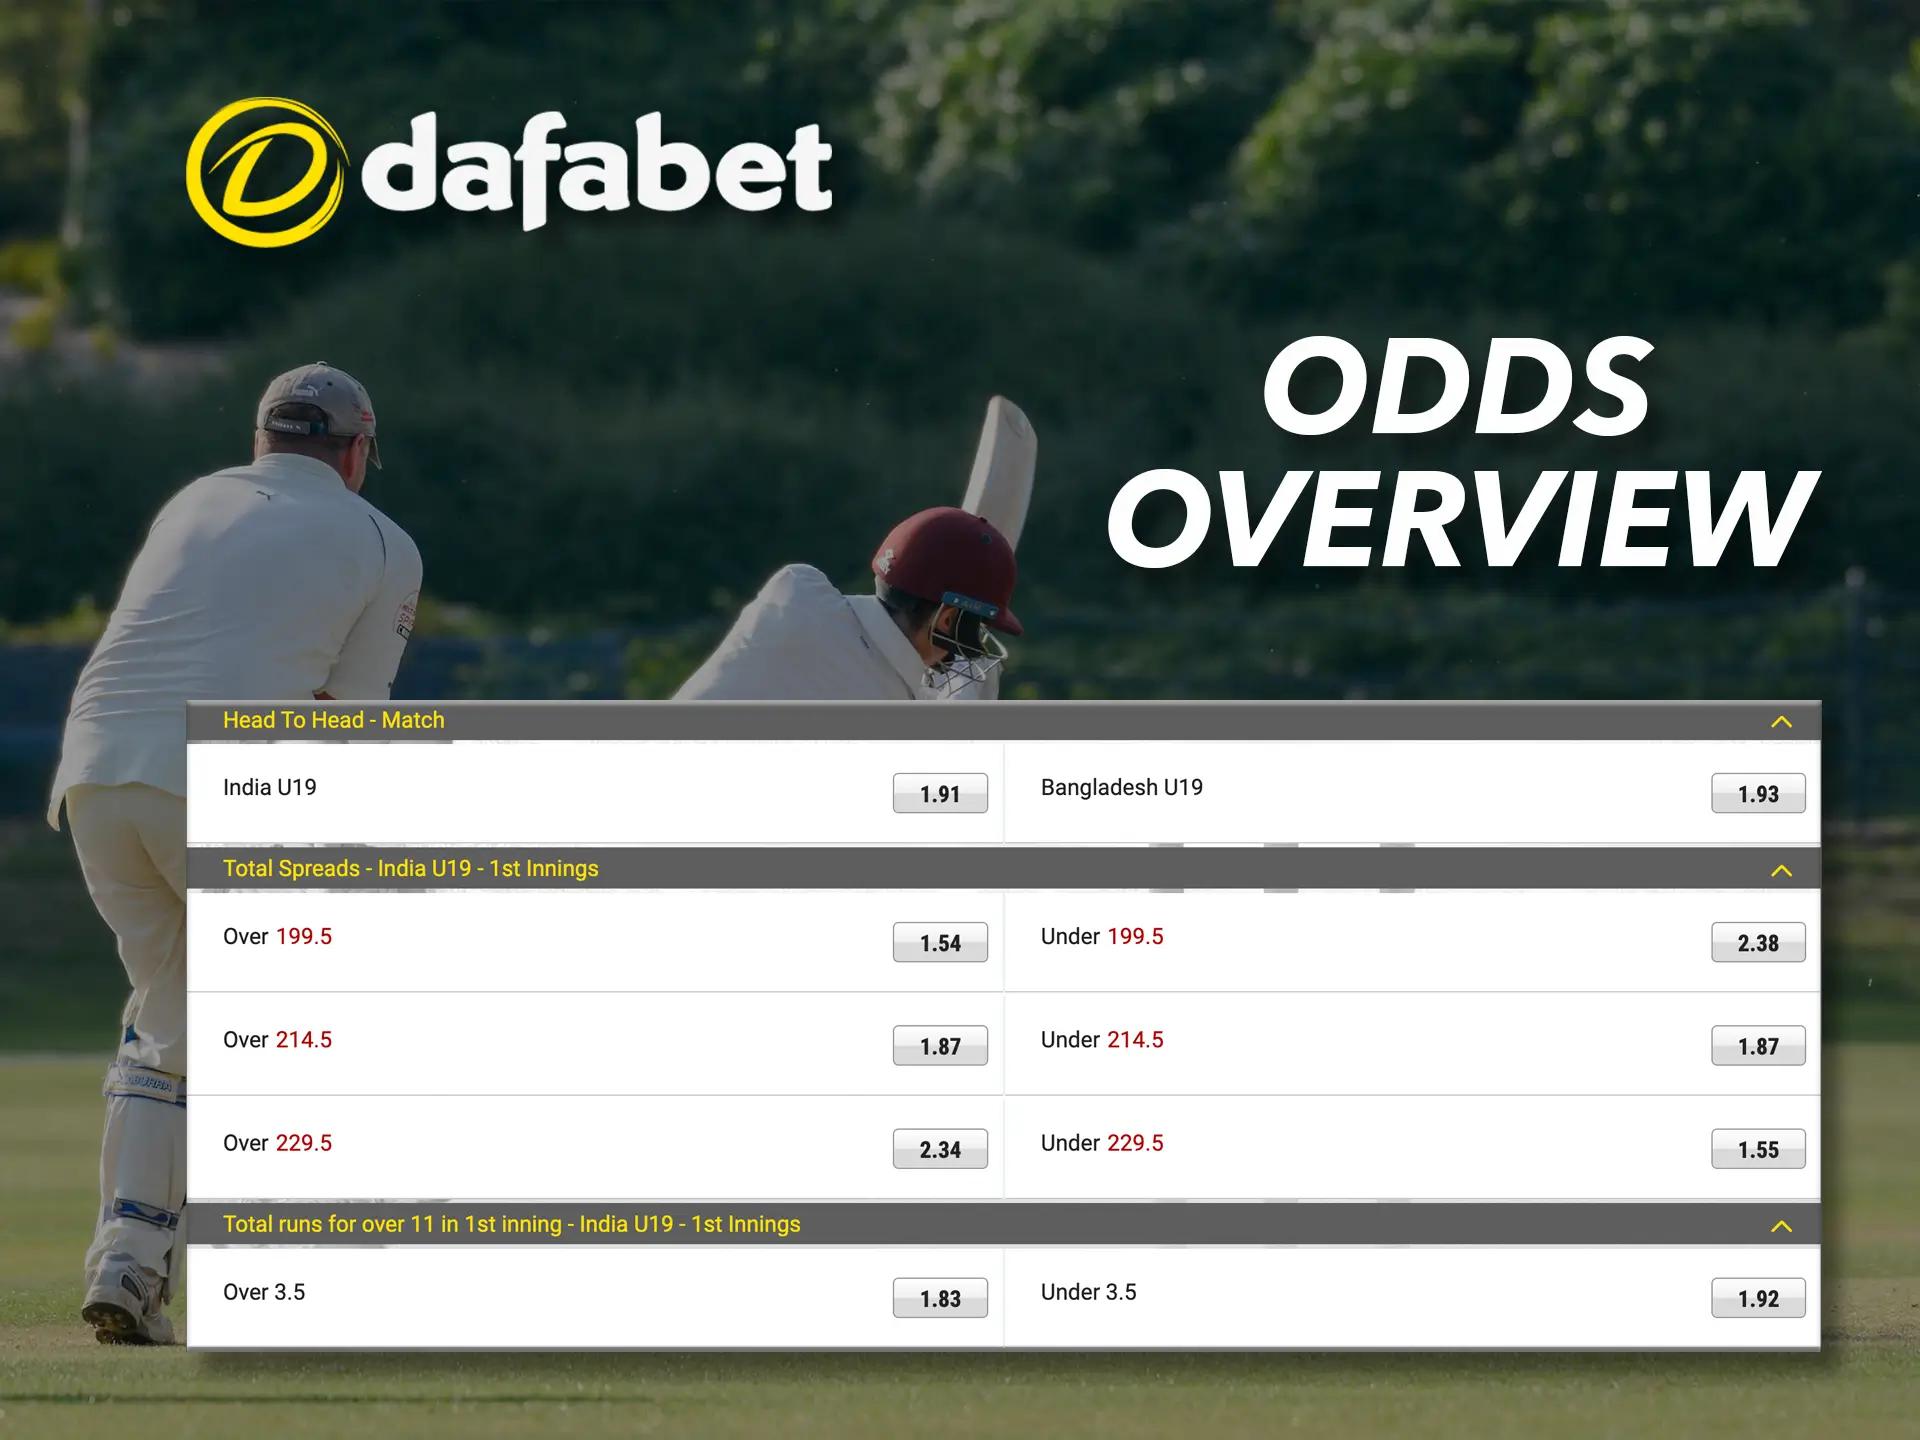 The variety of odds at Dafabet gives the user a wide range of choices and winning opportunities.